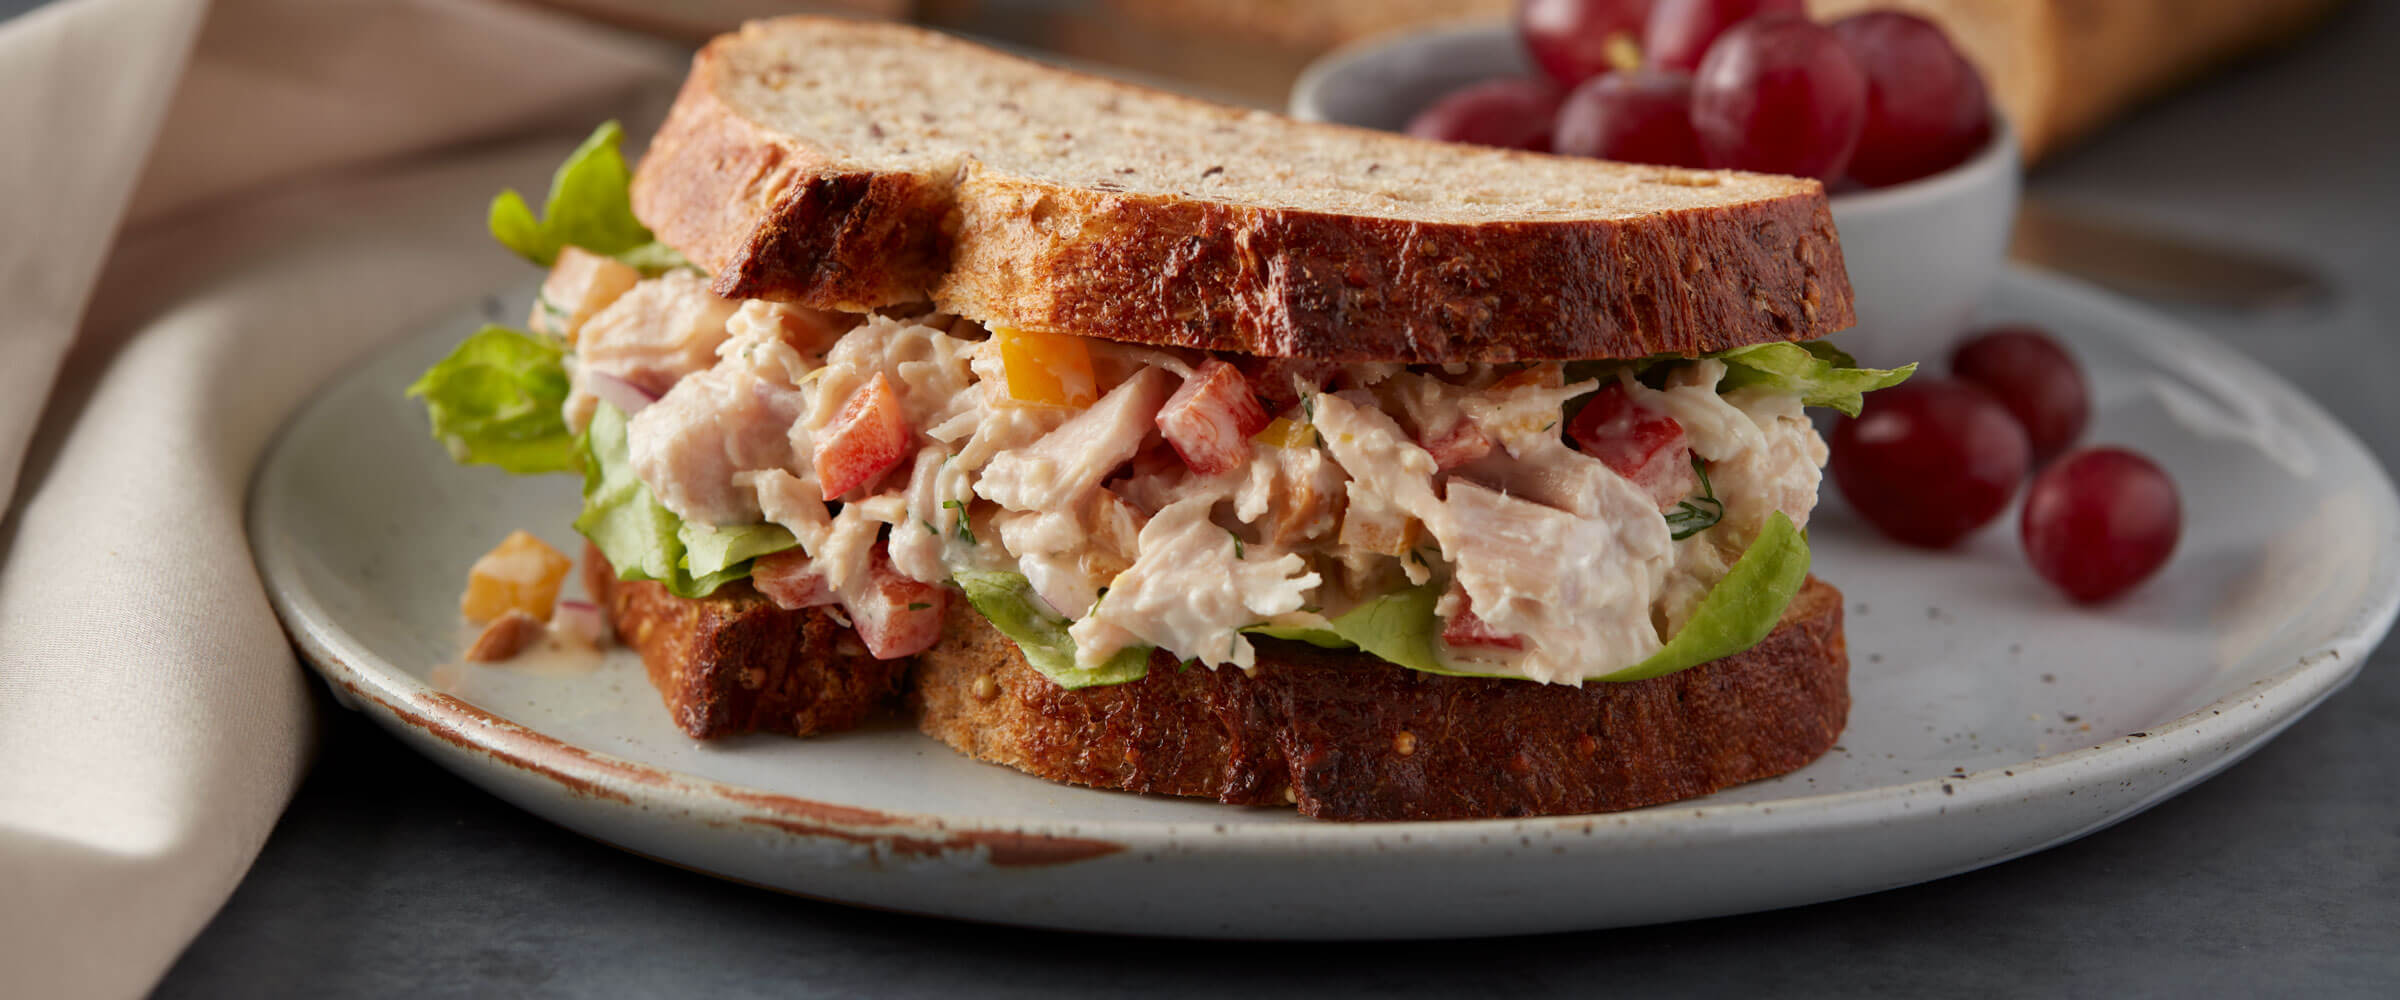 Chicken Salad Sandwich on wheat bread with side of grapes